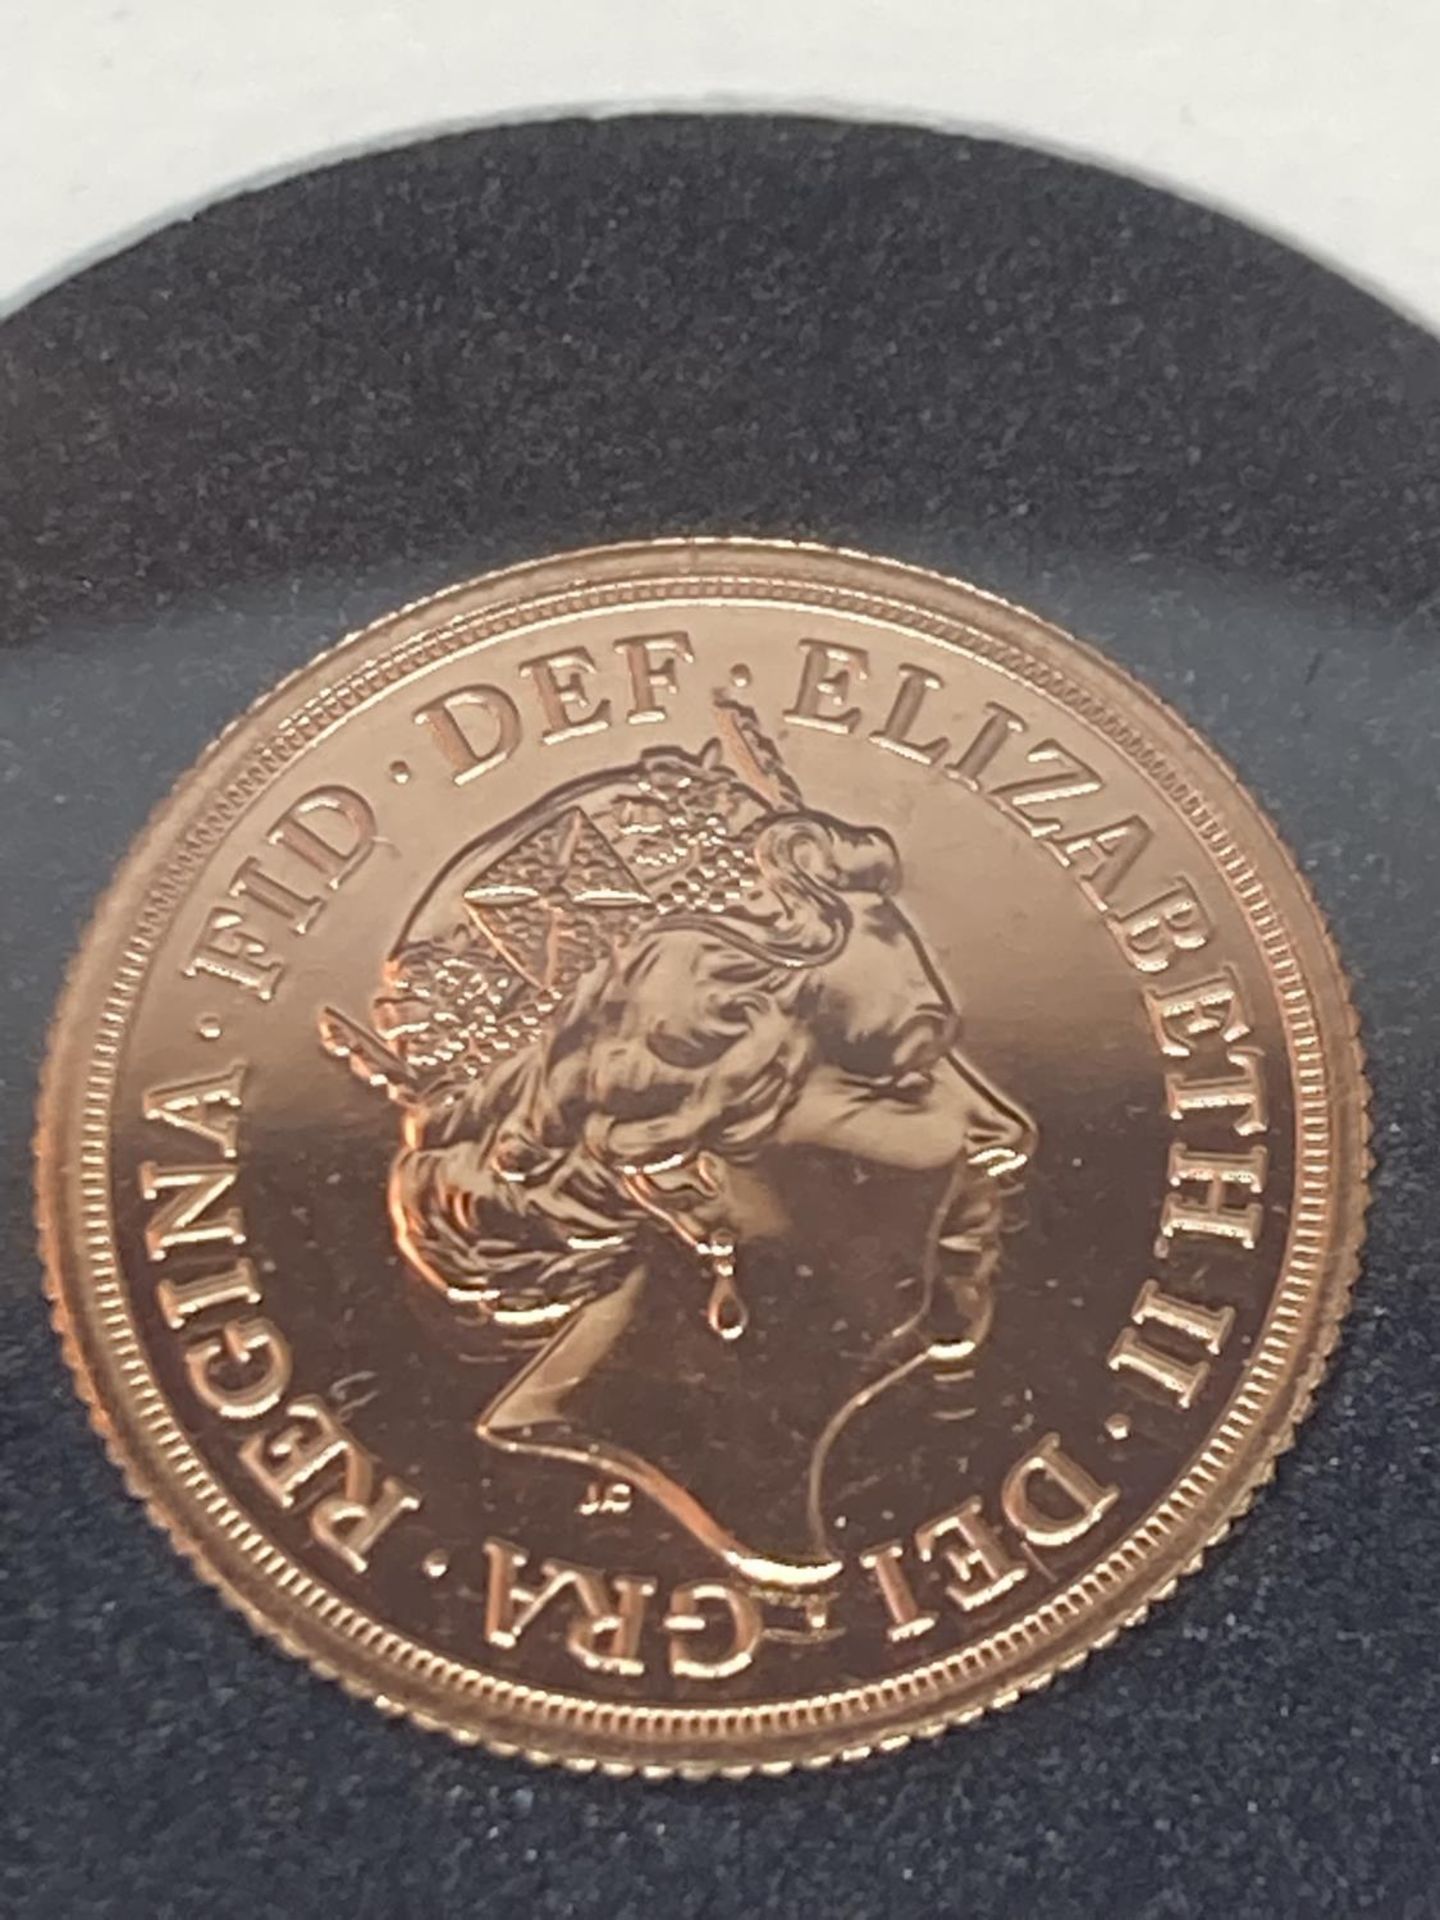 A 2016 LONG TO REIGN OVER US DATESTAMP UK GOLD SOVEREIGN - Image 3 of 6